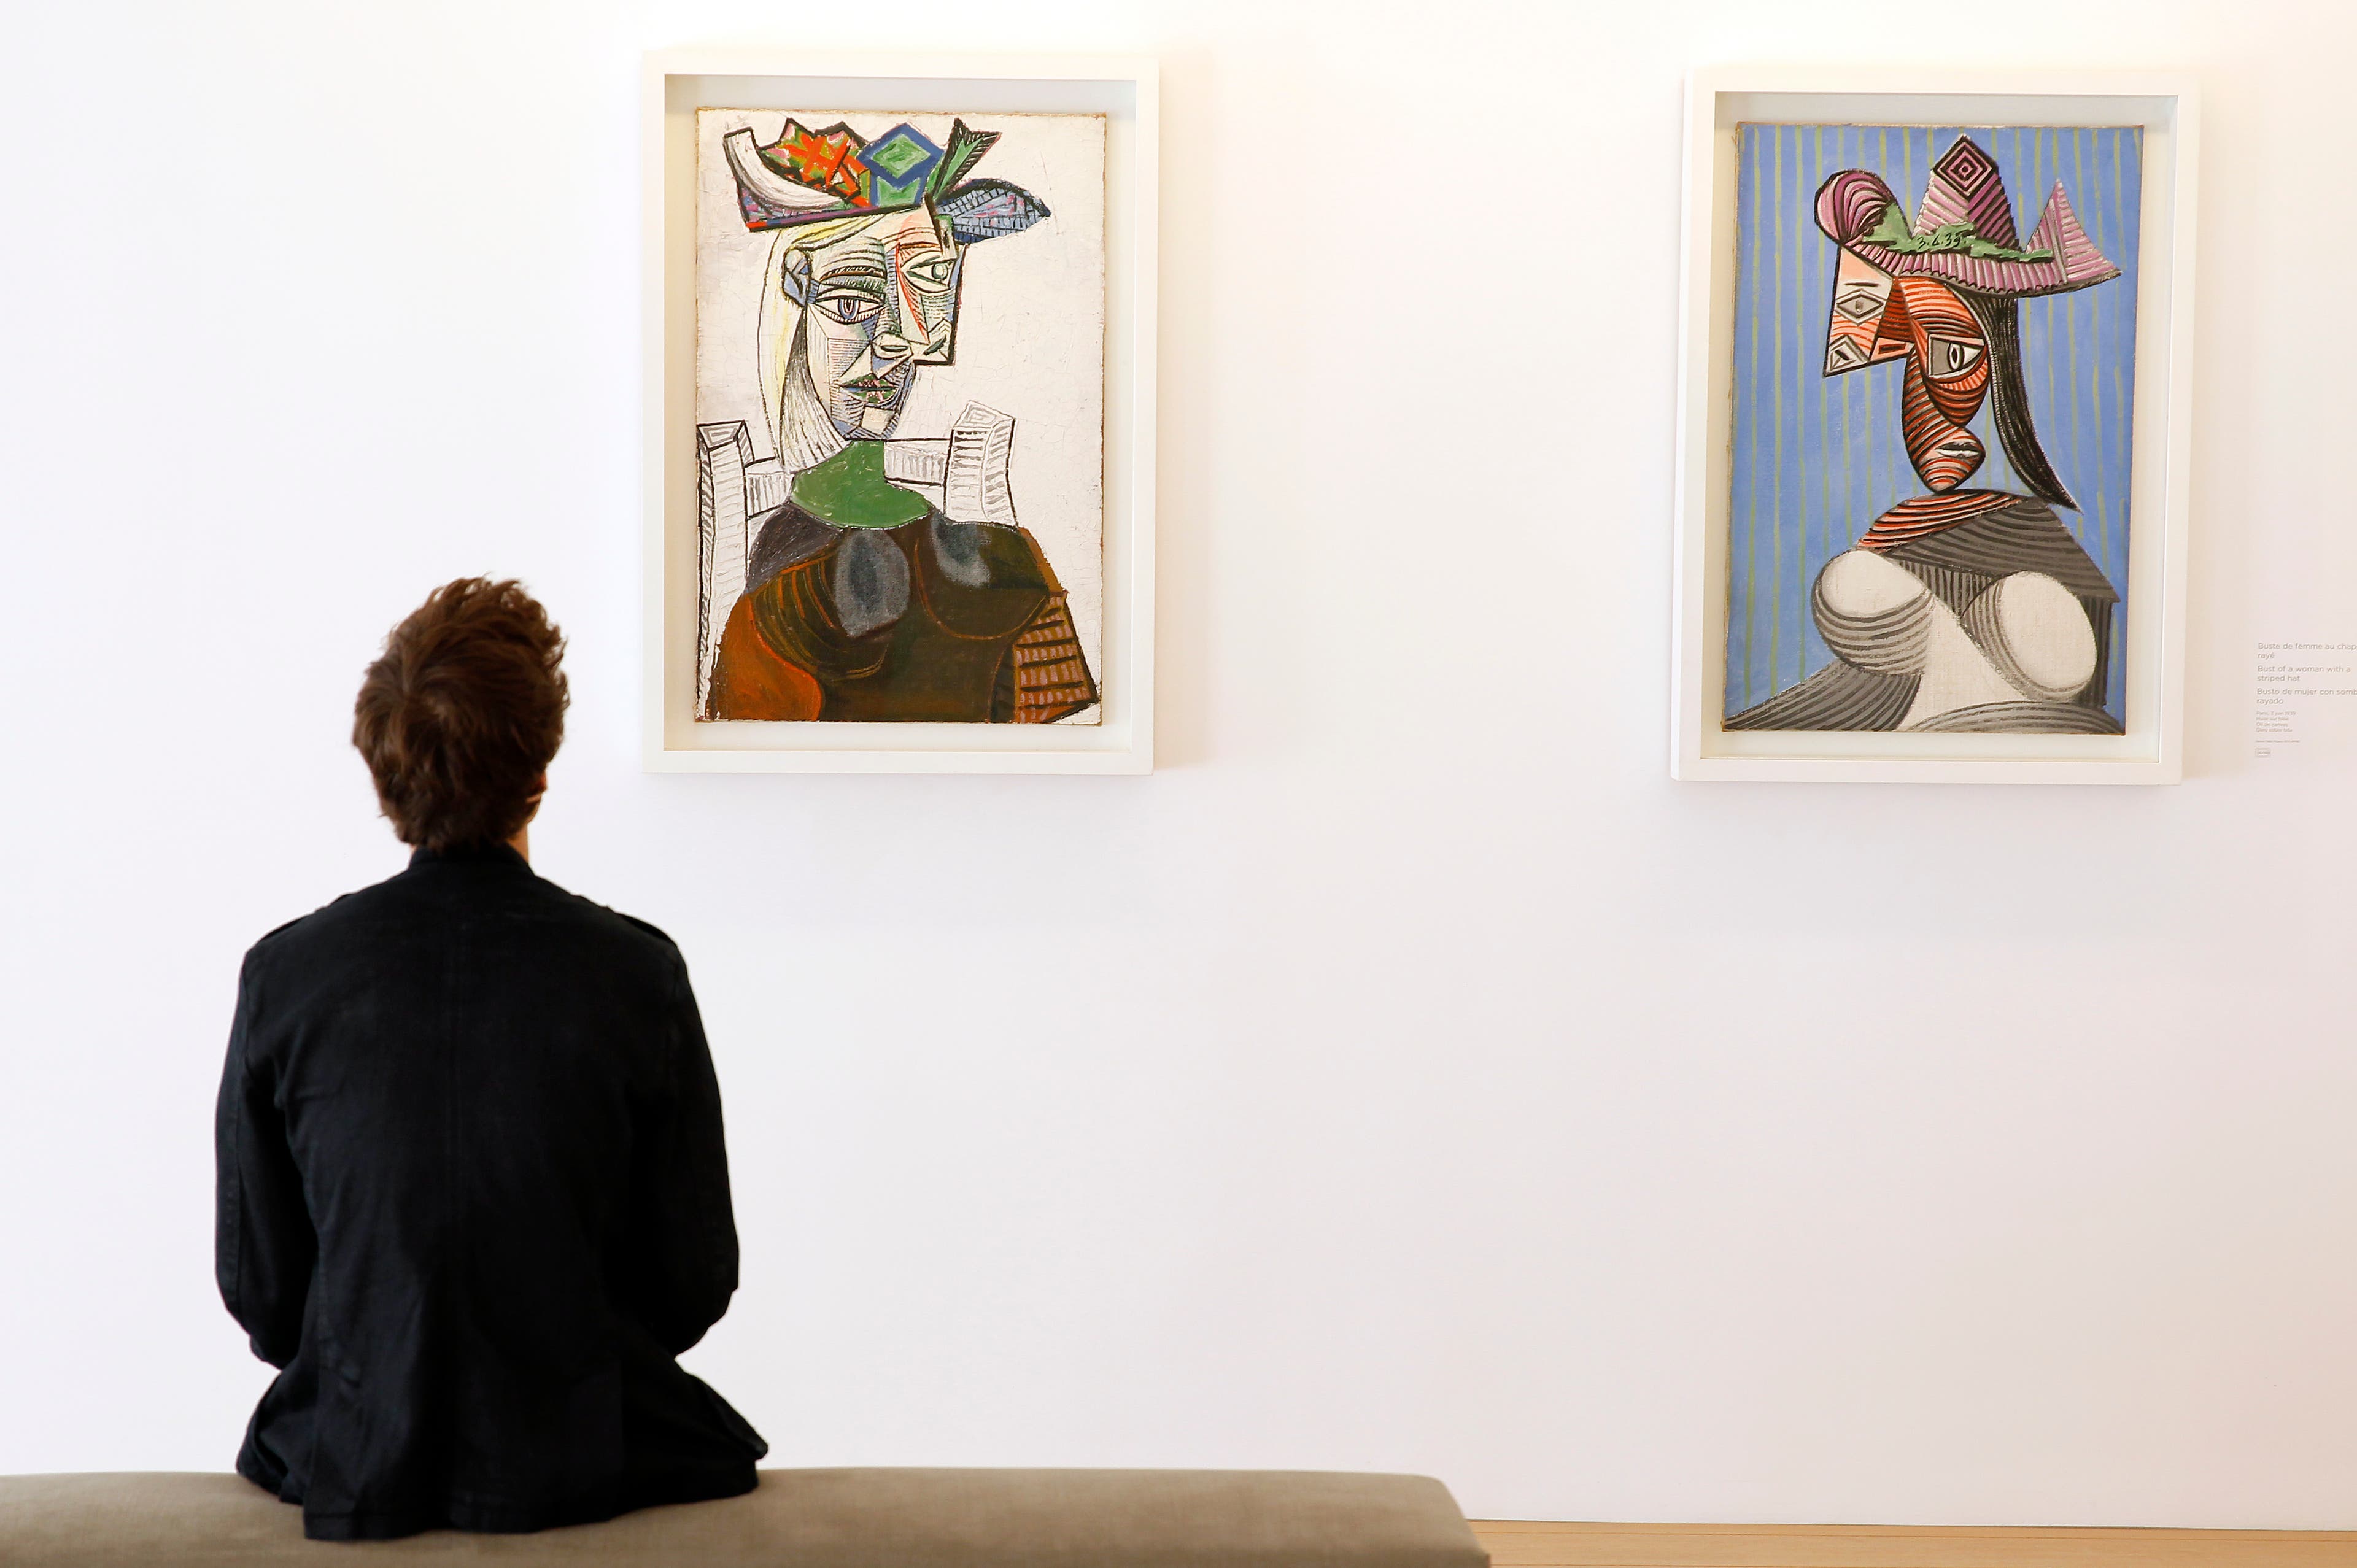 PARIS, FRANCE - OCTOBER 18: A visitor looks at Picasso paintings 'Seated woman with a hat' and 'Bust of a woman with a striped' during the press day at the Picasso Museum, on October 18, 2014 in Paris, France. The museum will reopen on the 25th and will be inaugurated the same day by French president Francois Hollande. (Photo by Thierry Chesnot/Getty Images)